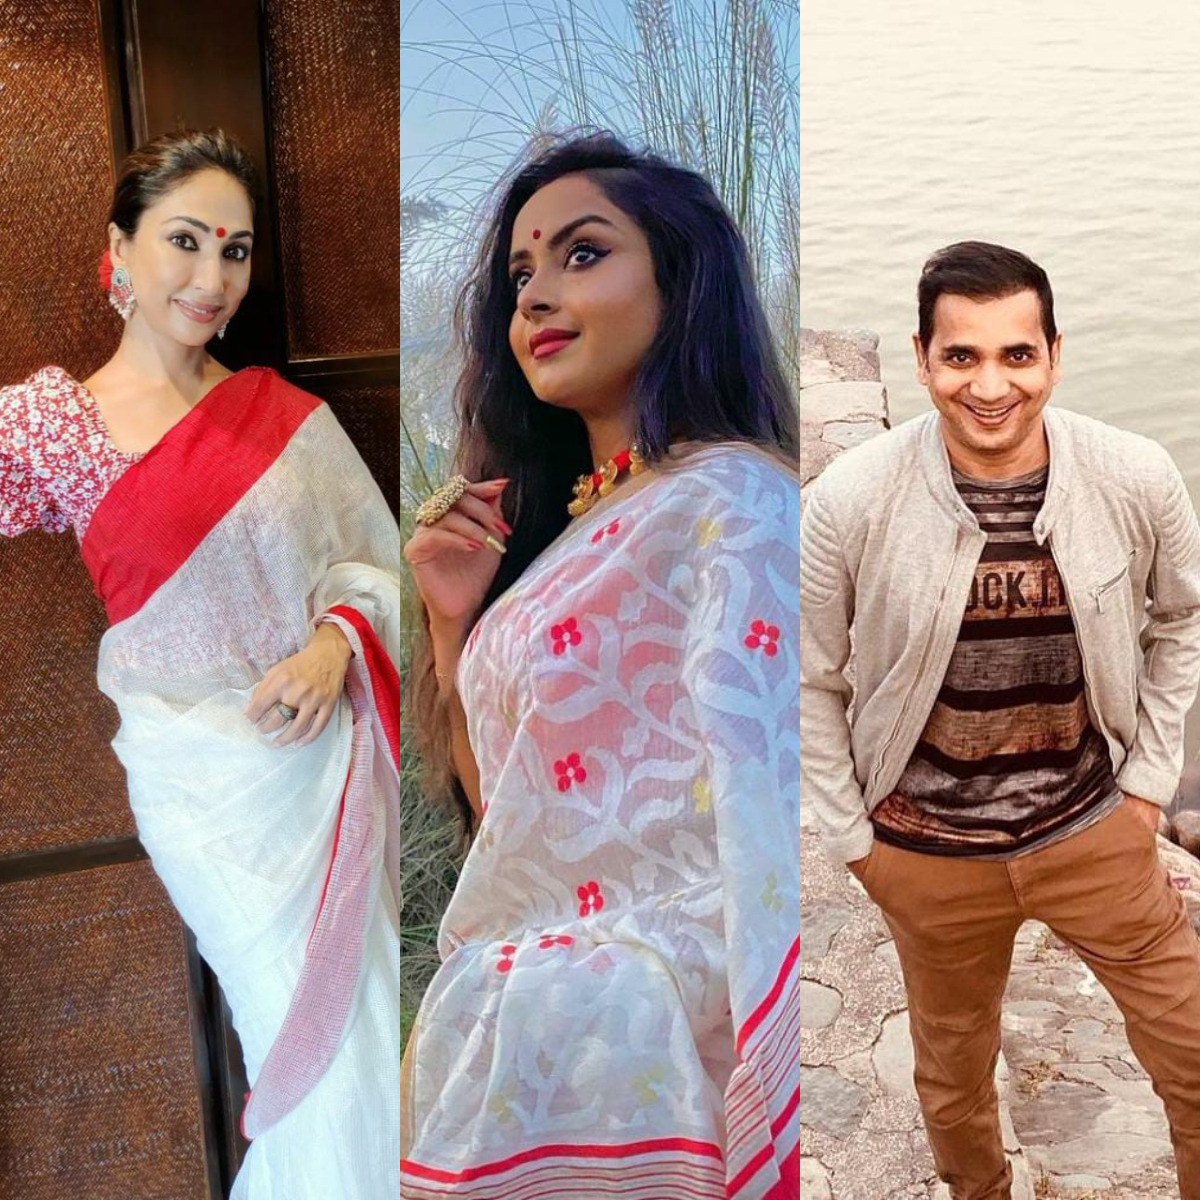 National Tourism Day Exclusive: Mouli Ganguly, Ishita Ganguly & Saanand Verma reveal their favourite spots